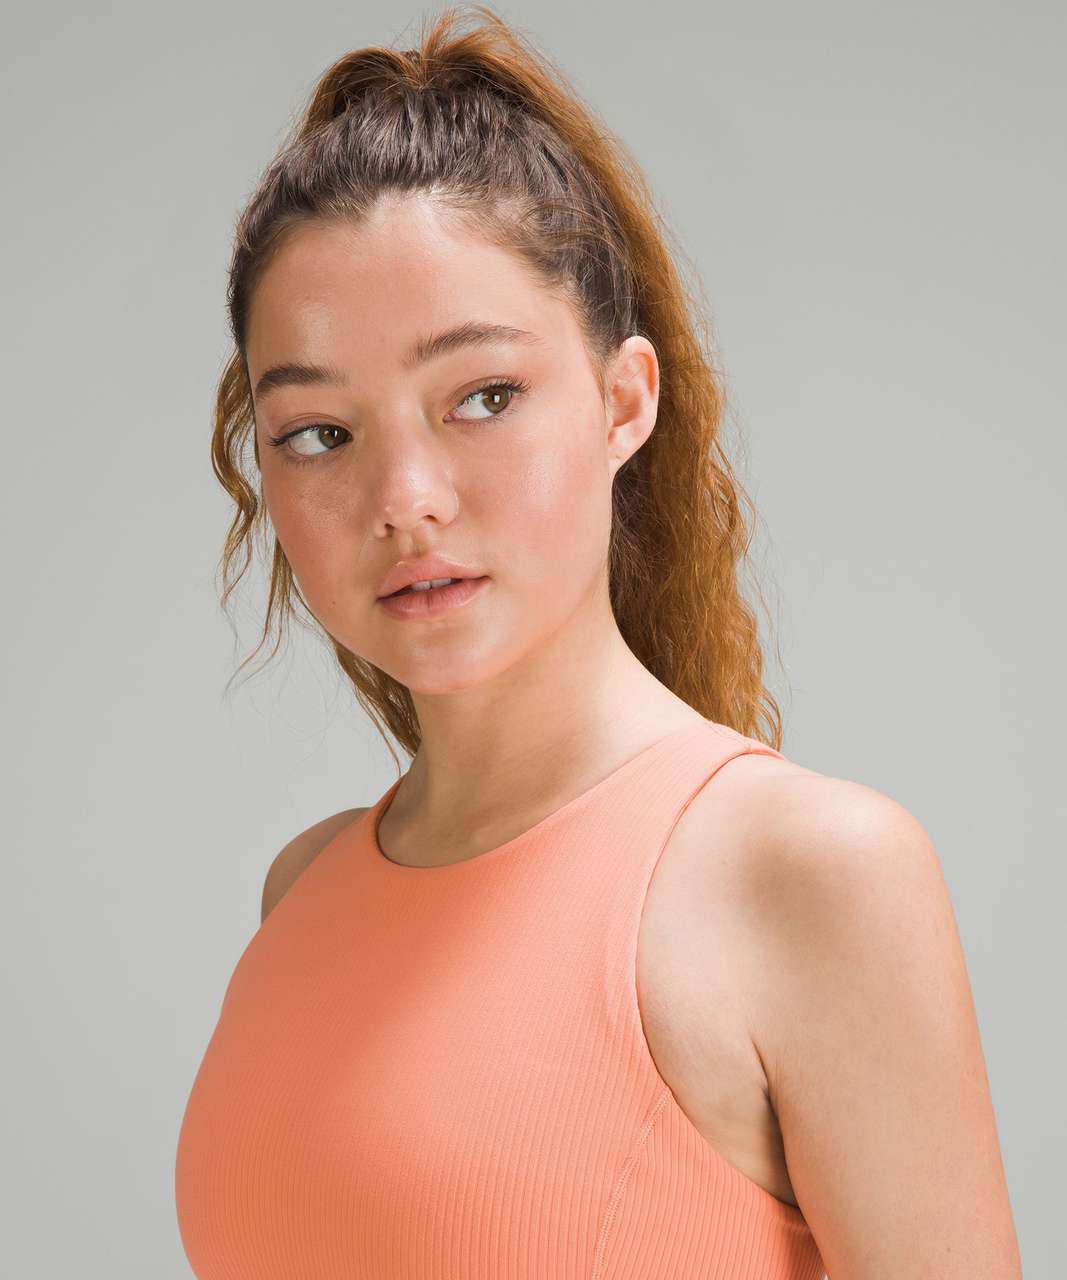 Lululemon Align Ribbed High-Neck Tank Top - Sunny Coral